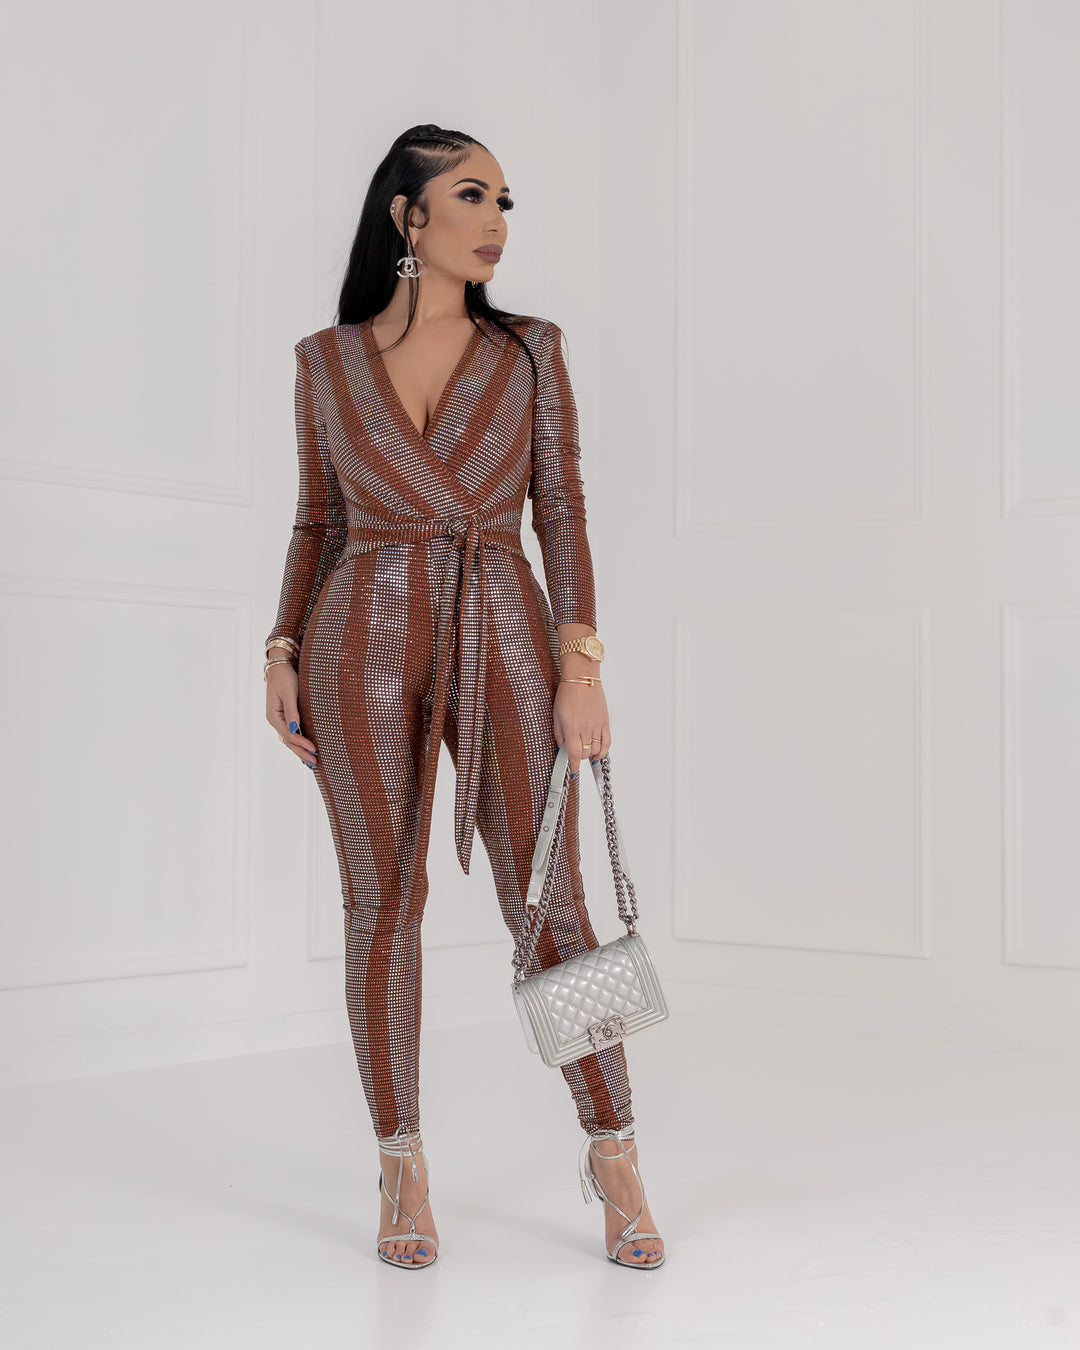 Goldie (Bronze With Iridescent Silver Jumpsuit) ALL SALE ITEMS ARE A FINAL SALE NO EXCHANGE